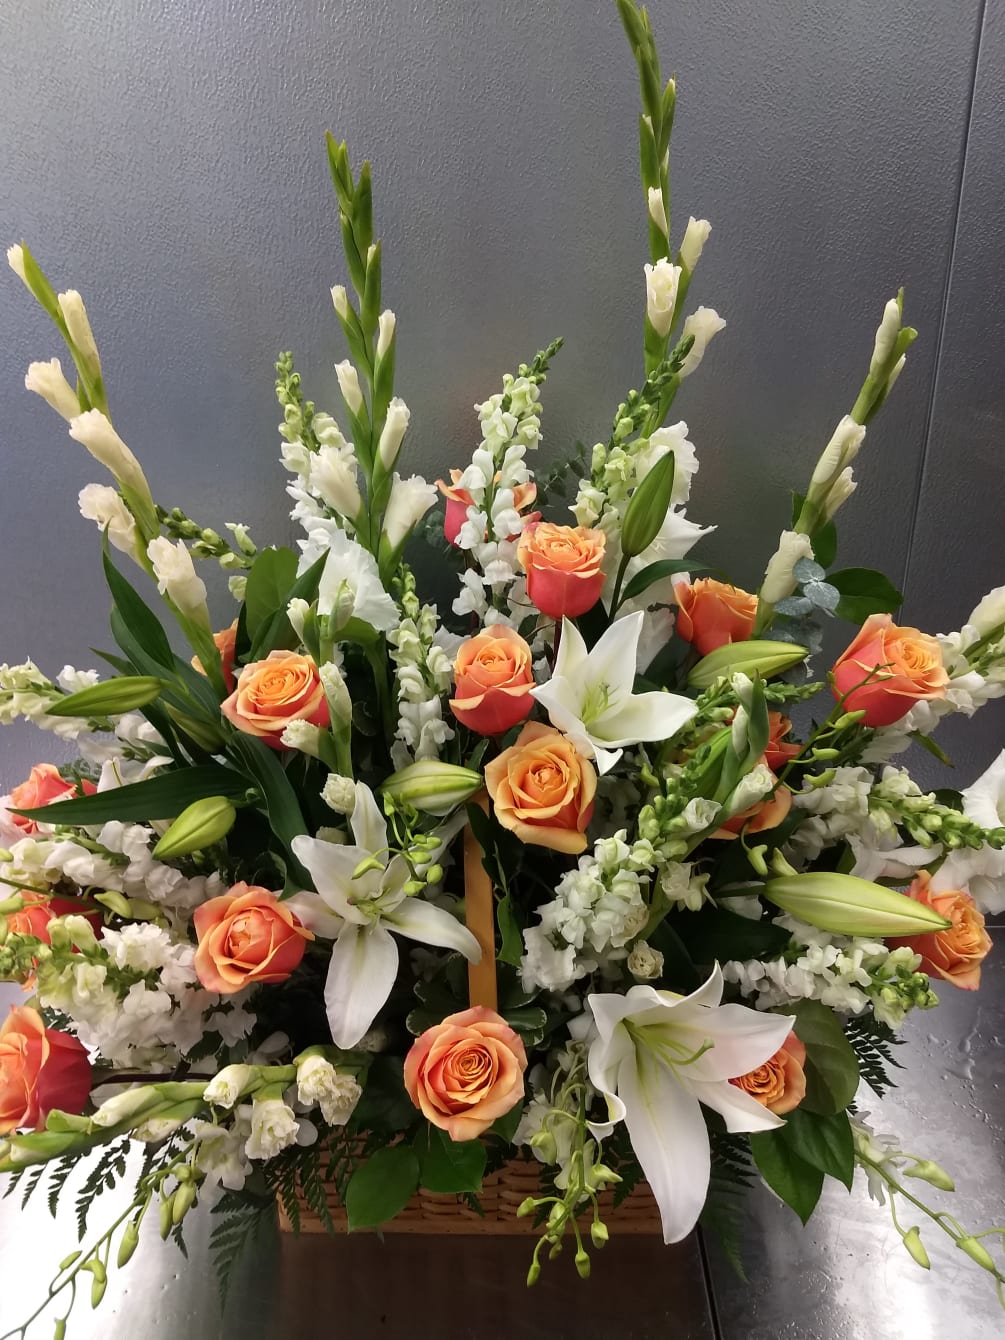 Soothing whites, peachy orange roses  and greens are combined beautifully in